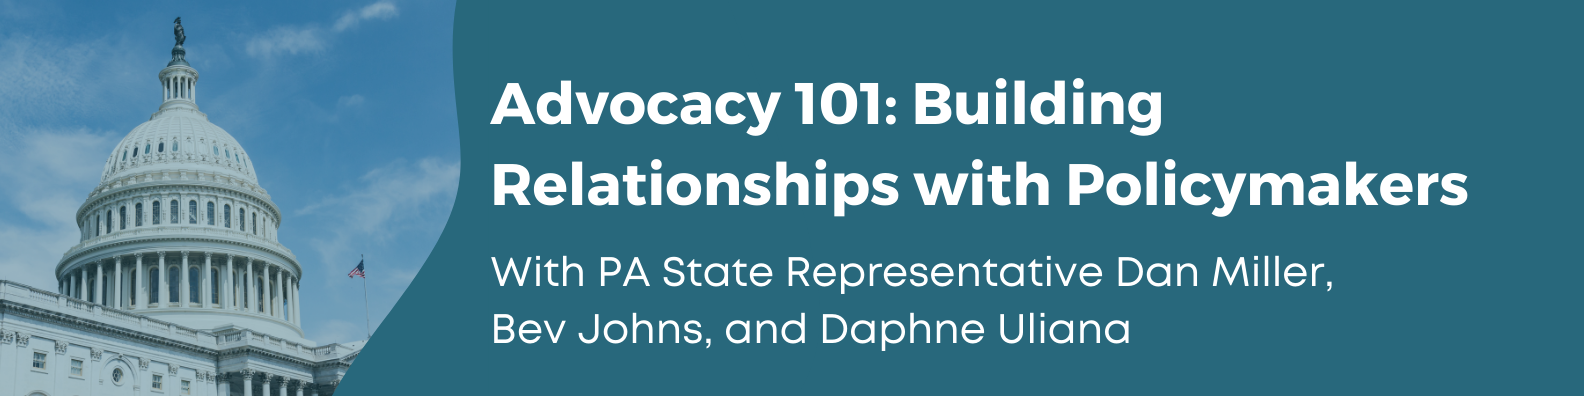 Advocacy 101: Building Relationships with Policymakers with PA State Representative Dave Miller, Bev Johns, and Daphne Uliana